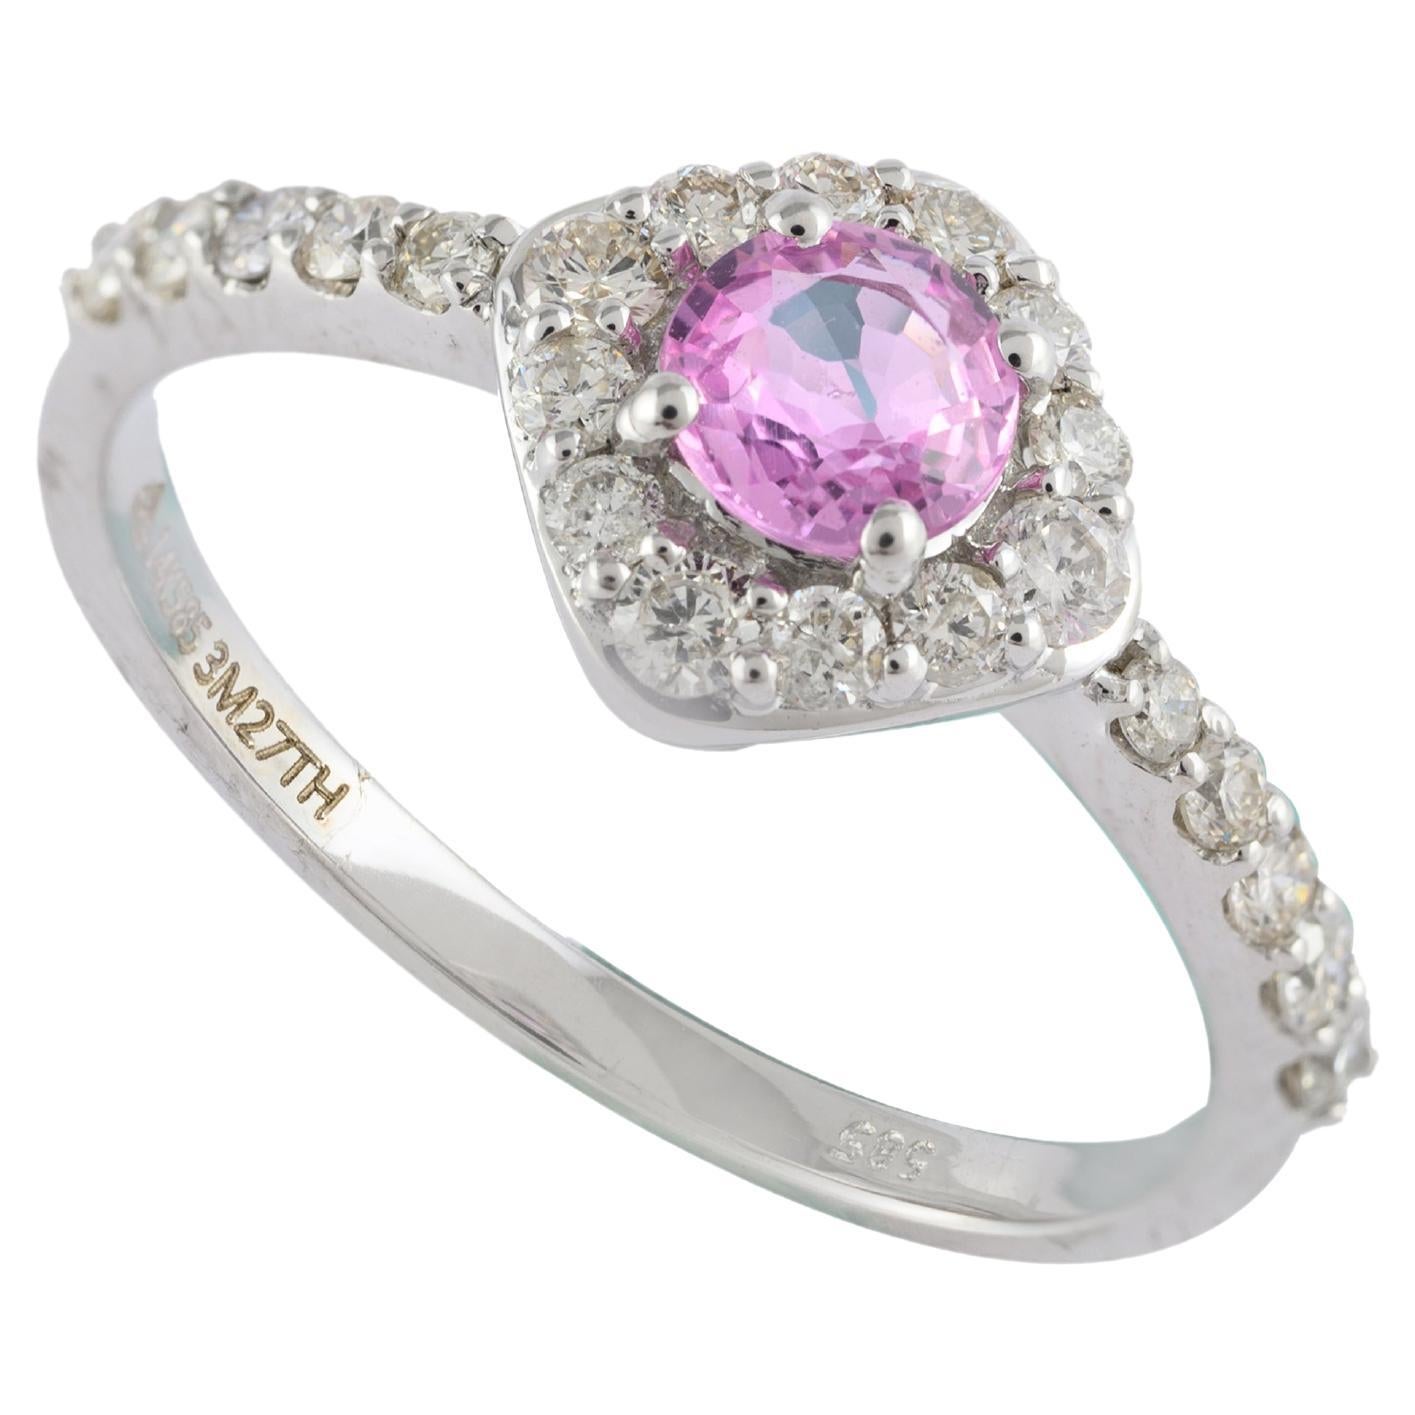 For Sale:  Minimal Halo Diamond and Pink Sapphire Ring Studded in 14k Solid White Gold